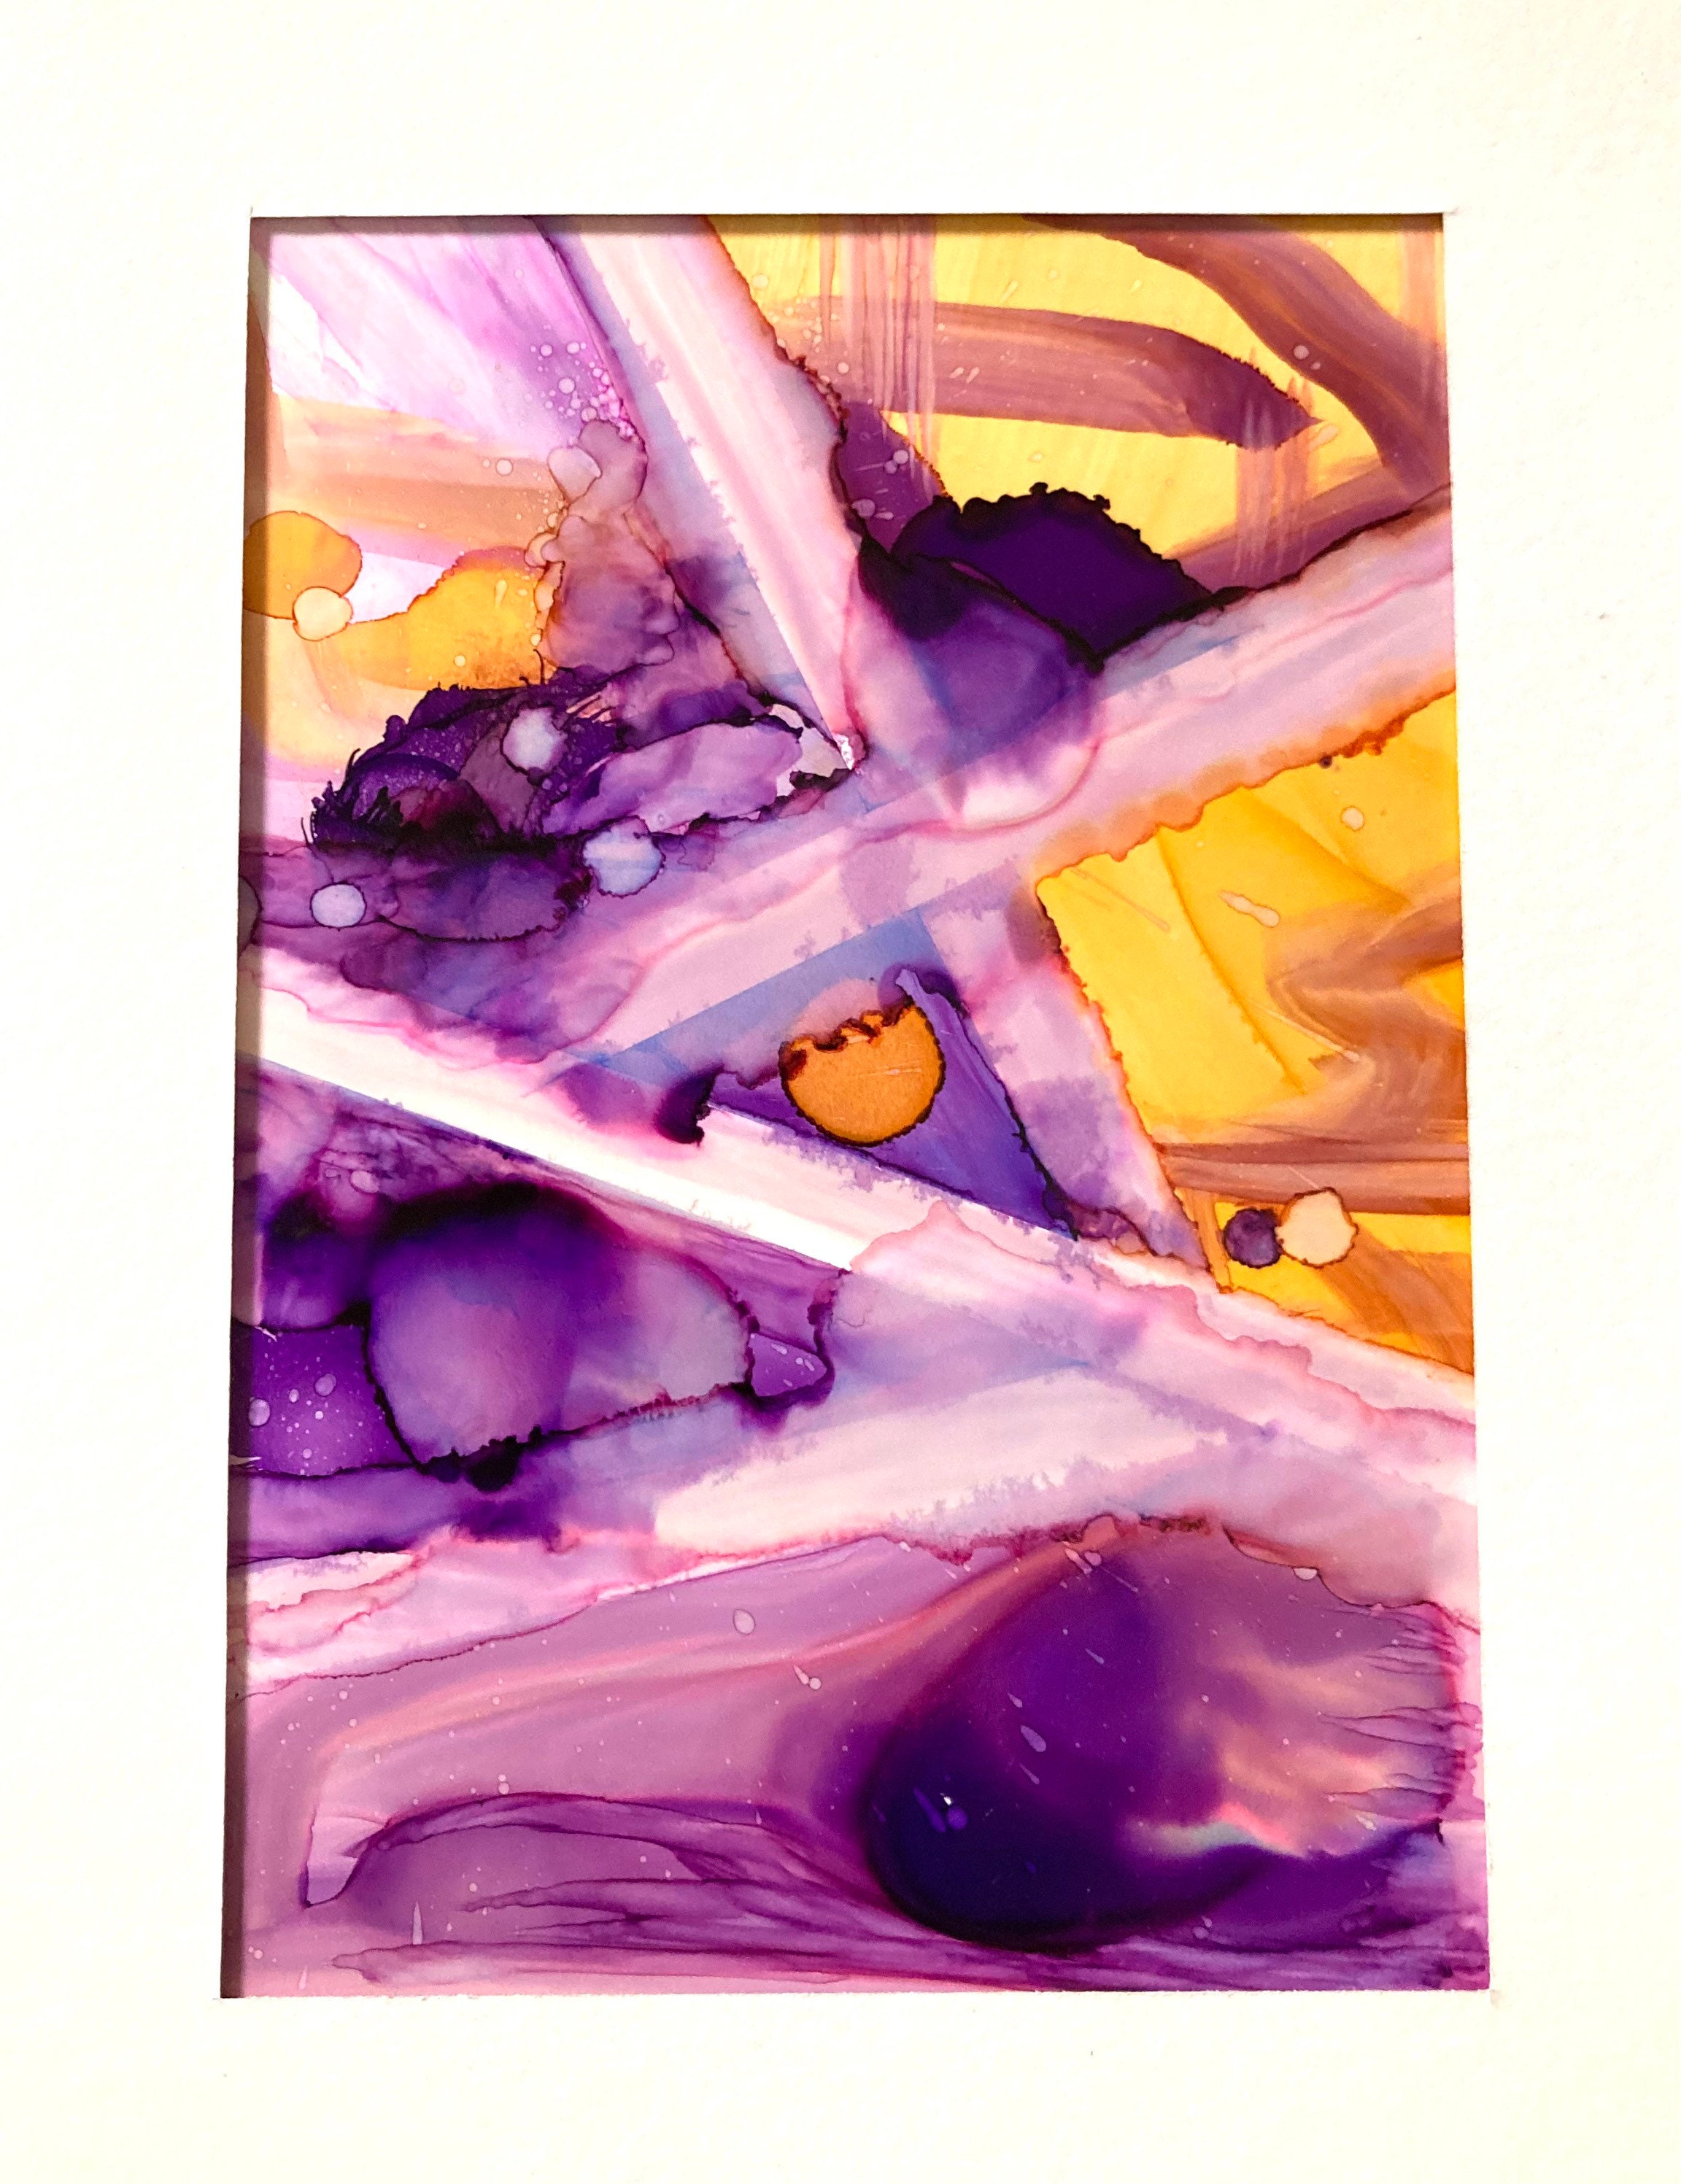 Original Alcohol Ink Painting, on Yupo Paper, Modern Art, Abstract Painting  5X7 